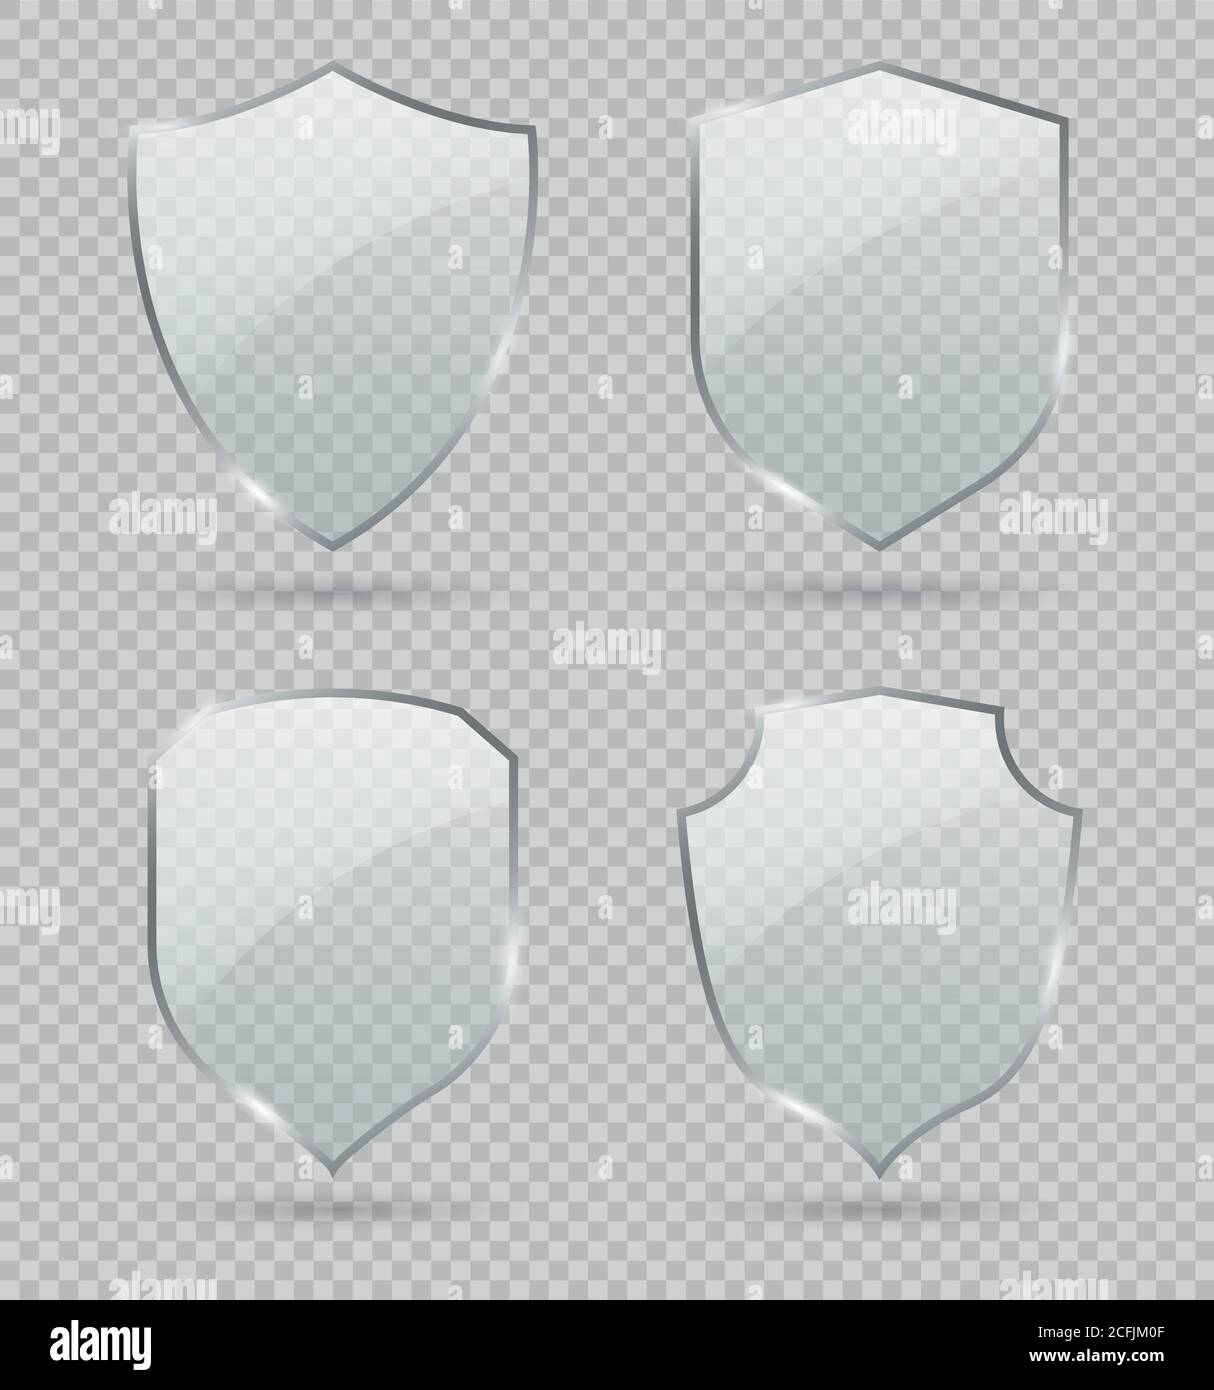 Glass shield. Set of transparent glass shields. Conceptual symbol of protection, safety, security and guarding. Vector Stock Vector